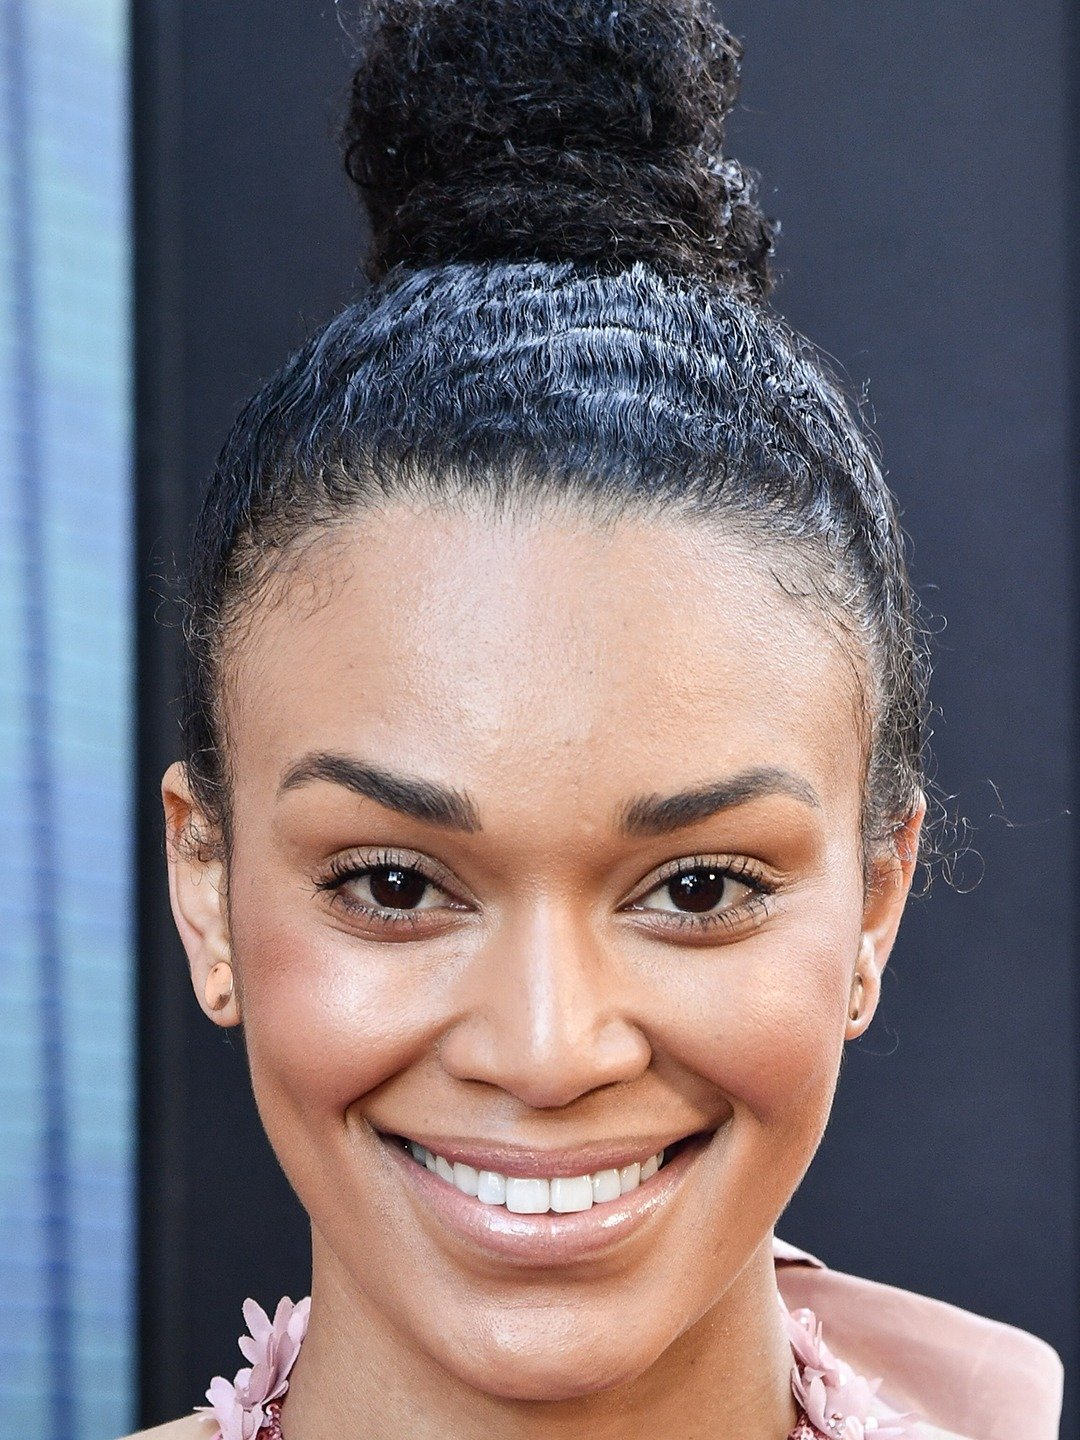 How tall is Pearl Thusi?